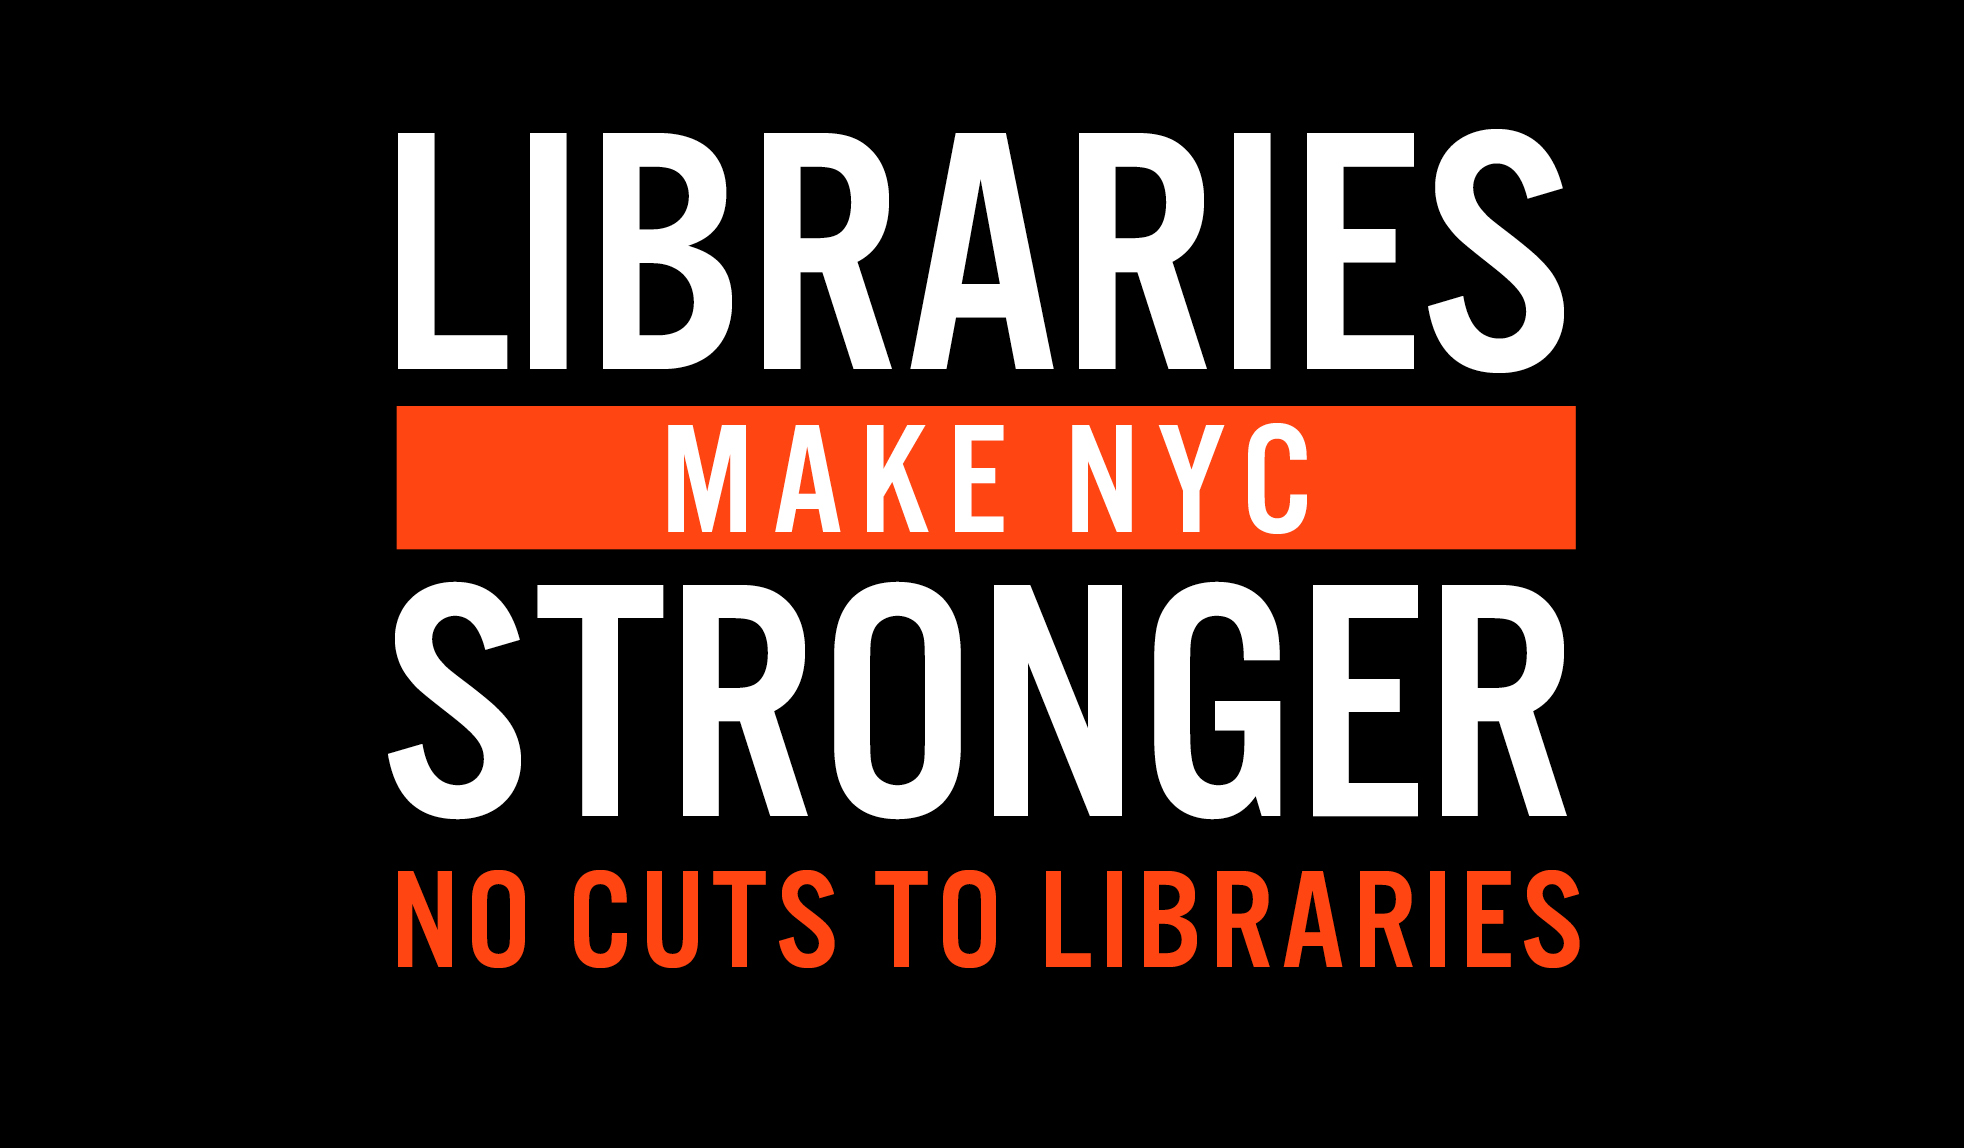 Send a message to your elected officials. Tell them today: No Cuts to Libraries!